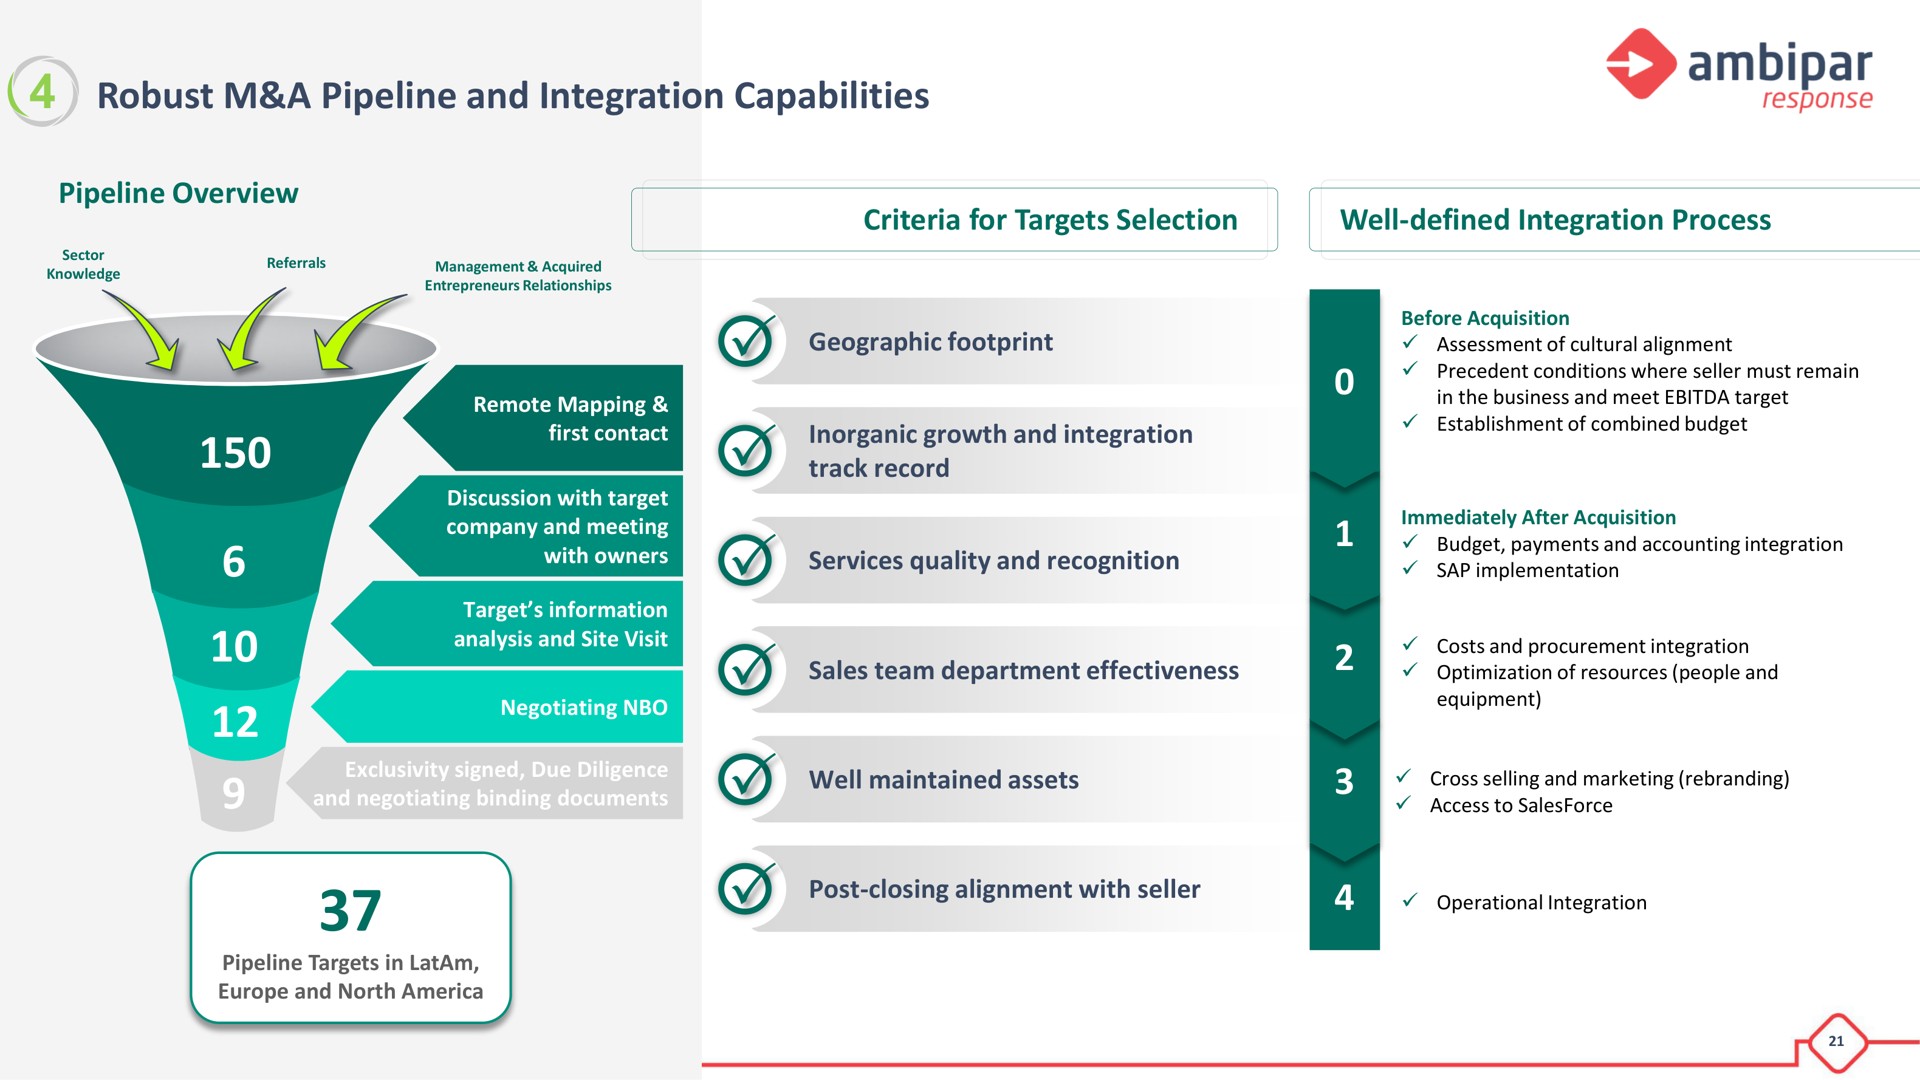 robust a pipeline and integration capabilities sees response | Ambipar Response